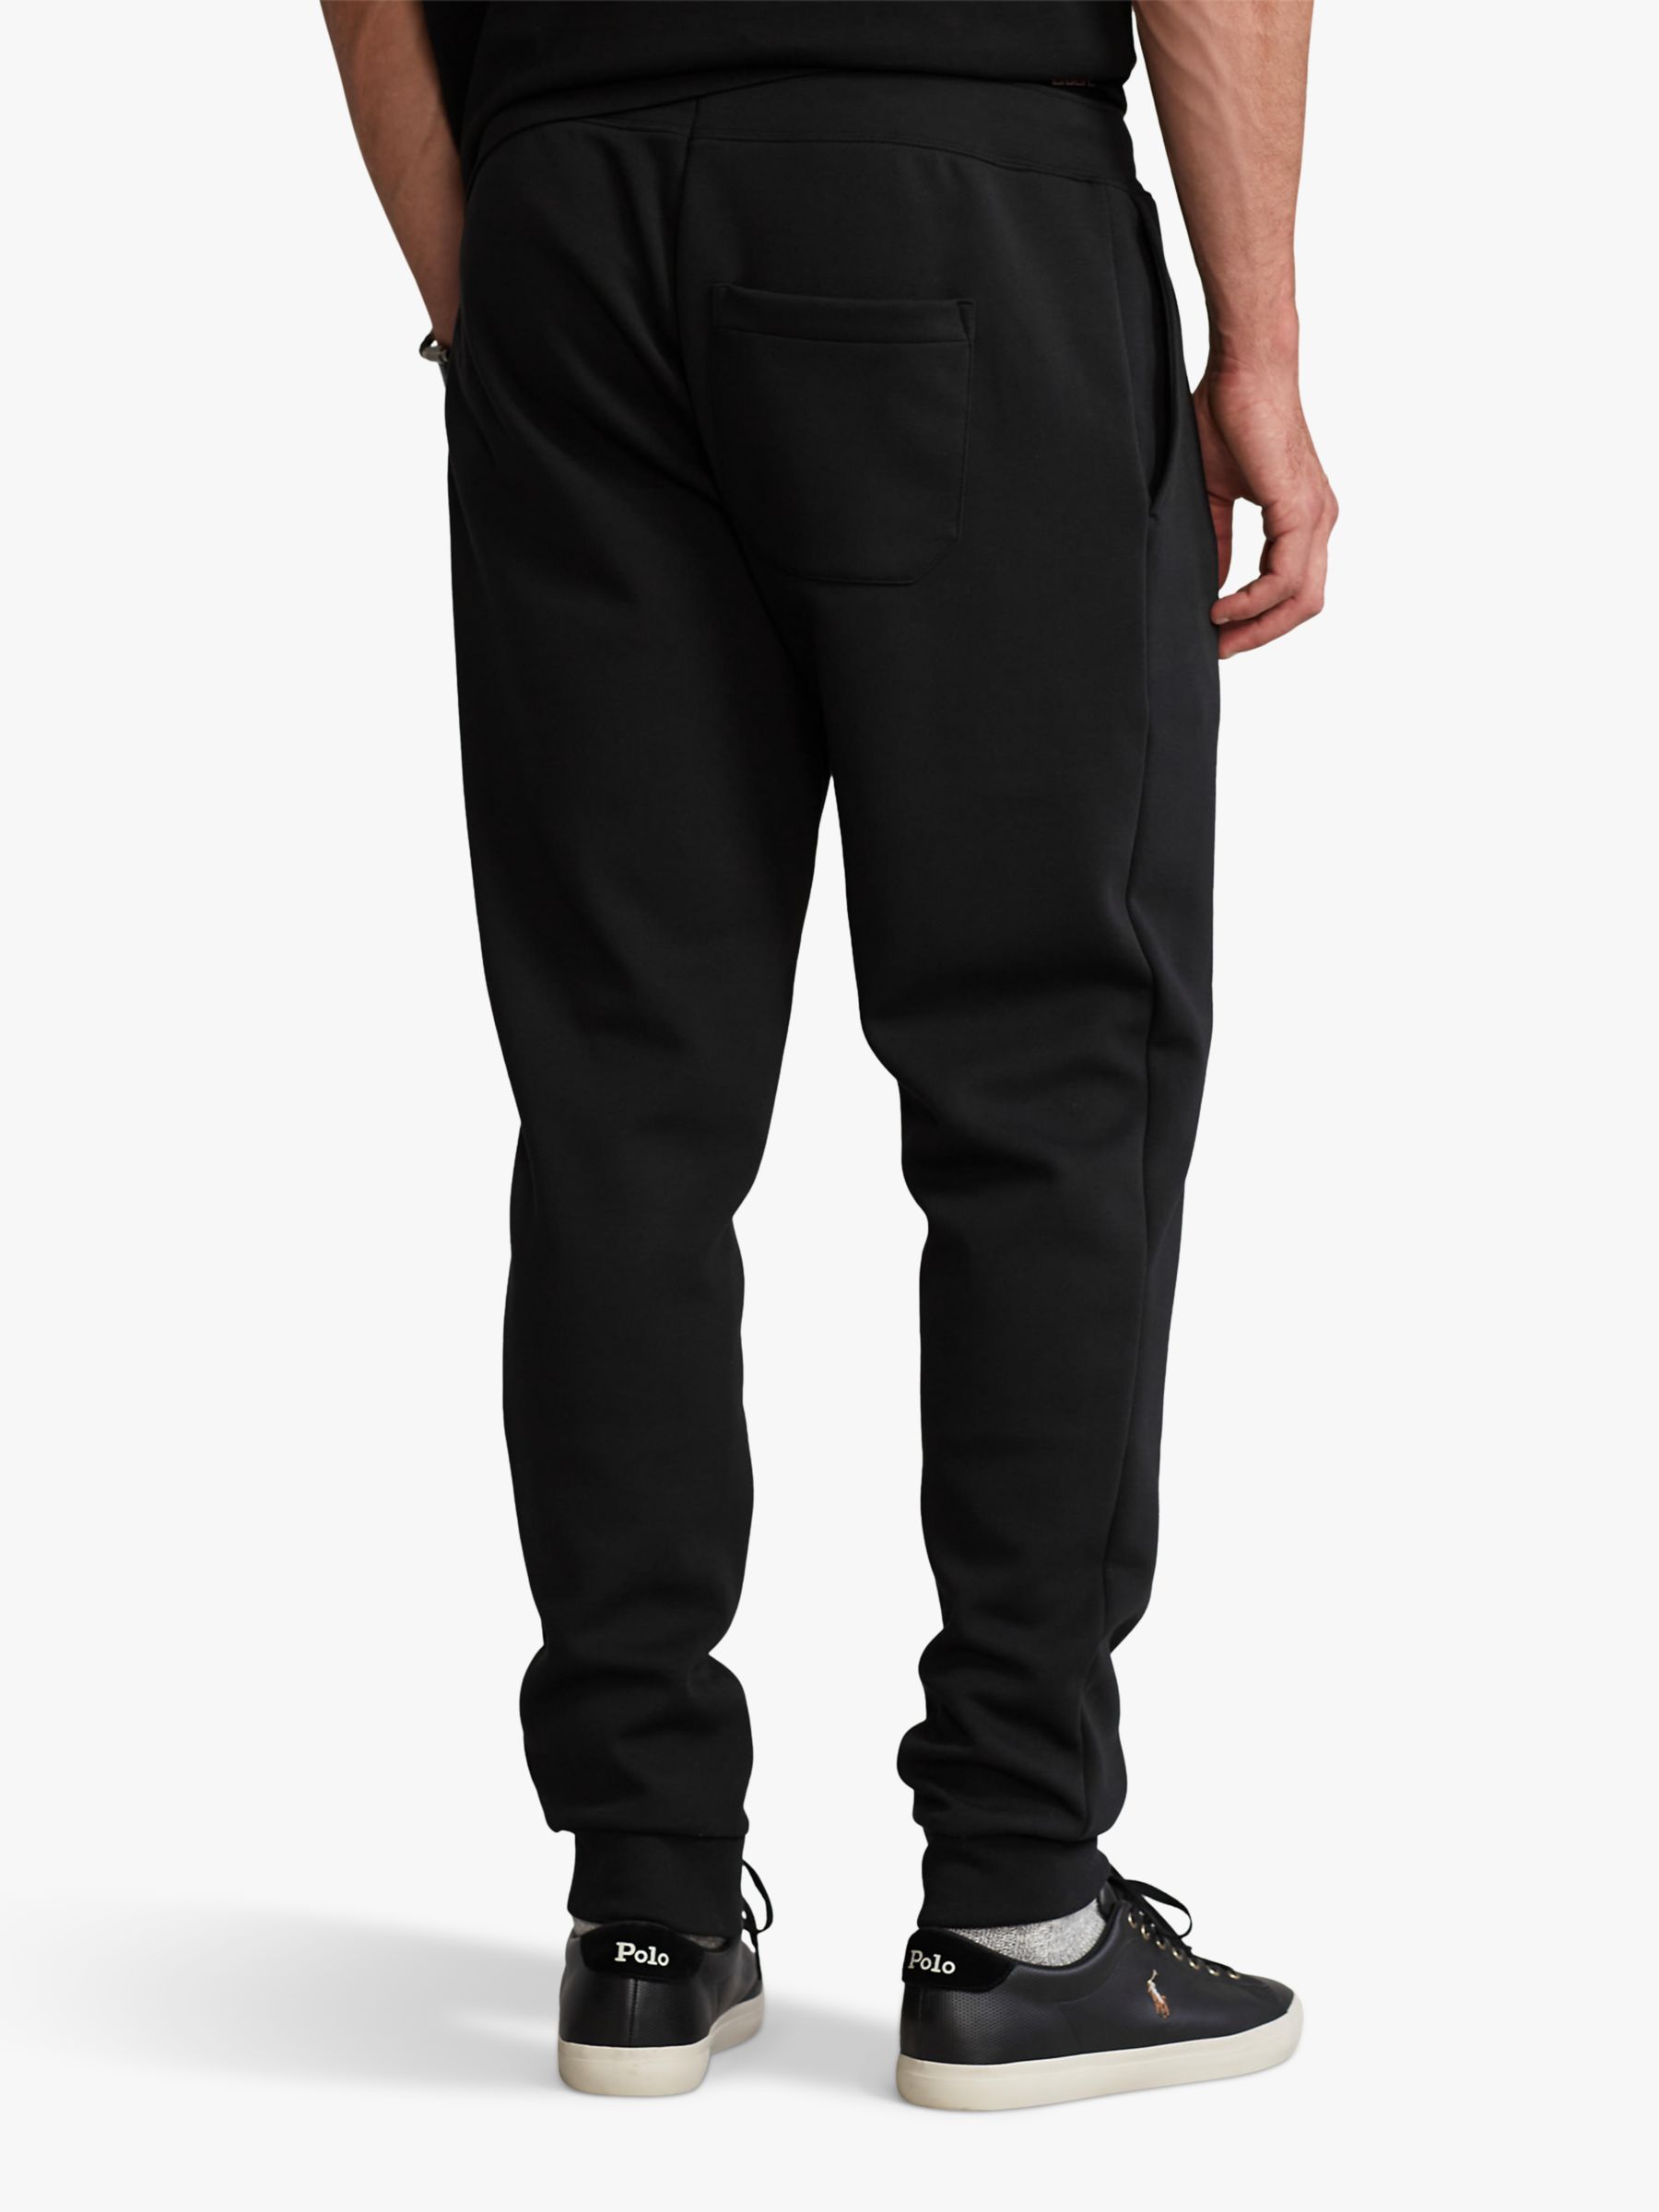 Polo Ralph Lauren Big & Tall Double Knit Joggers, Black at John Lewis ...